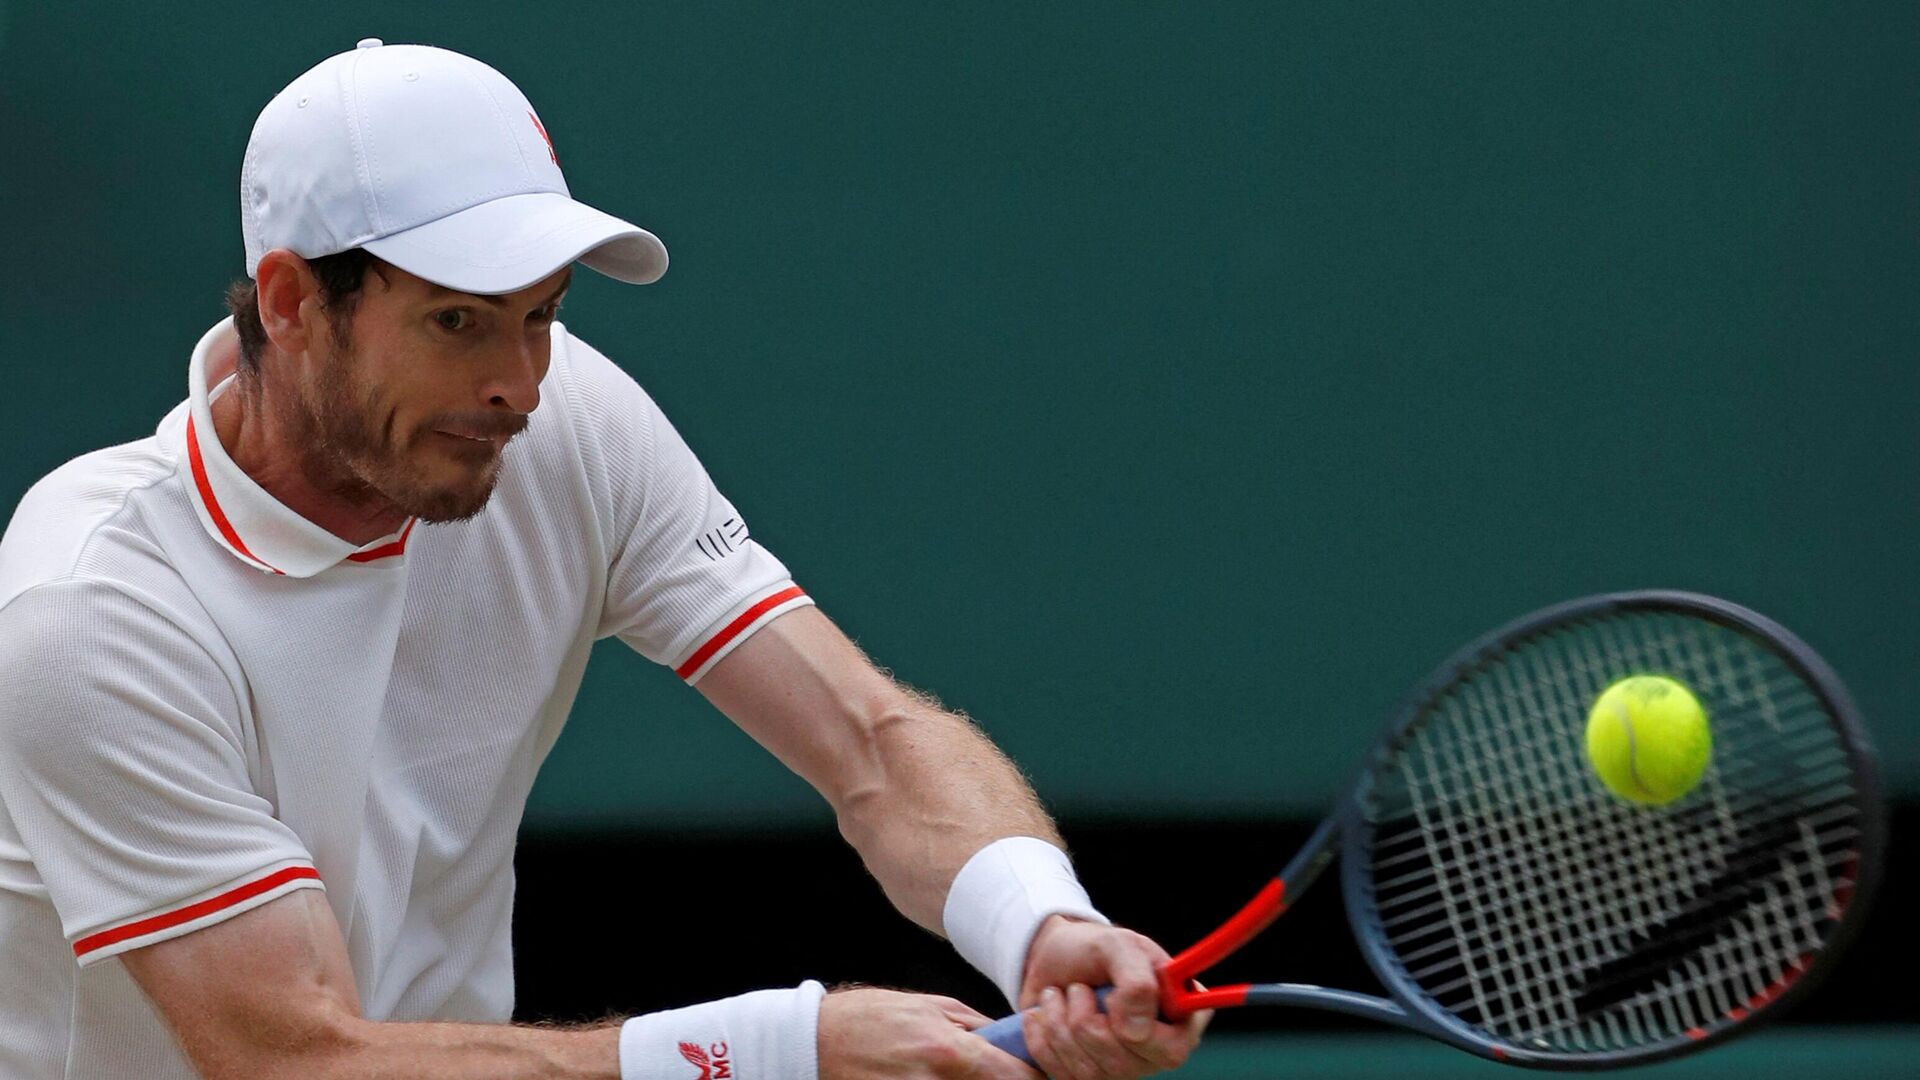 (FILES) In this file photo taken on July 02, 2021 Britain's Andy Murray returns against Canada's Denis Shapovalov during their men's singles third round match on the fifth day of the 2021 Wimbledon Championships at The All England Tennis Club in Wimbledon, southwest London. - Three-time Grand Slam champion Andy Murray of Britain and 21-year-old American were given wildcards spots into the ATP Cincinnati Masters tournament on August 3, 2021, orgnizers announced. (Photo by Adrian DENNIS / AFP) / RESTRICTED TO EDITORIAL USE - РИА Новости, 1920, 09.08.2021